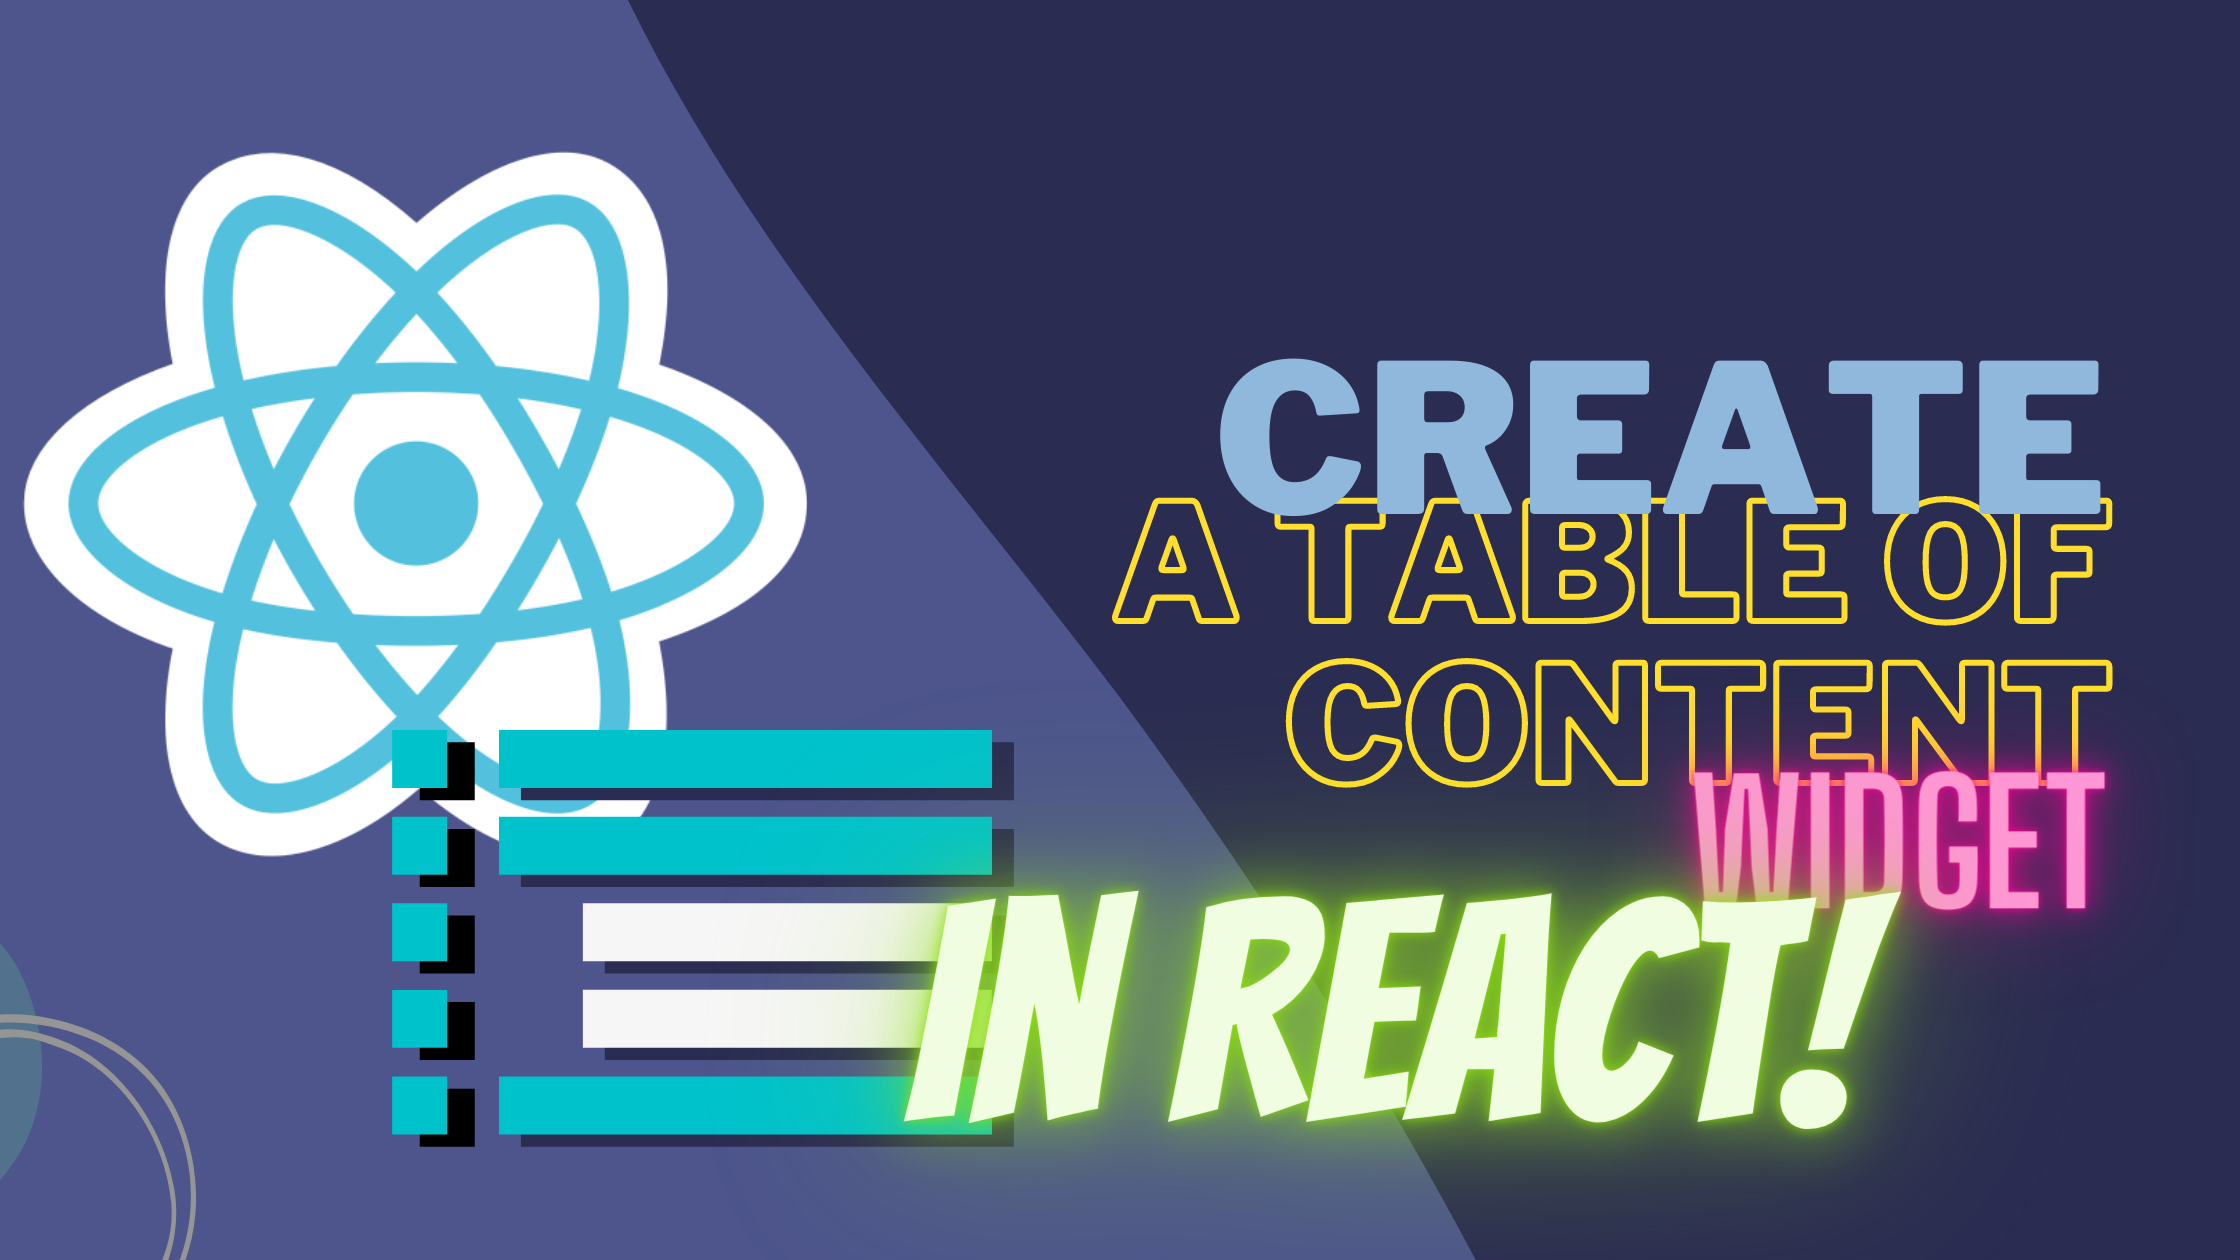 Creating a table of content widget in React